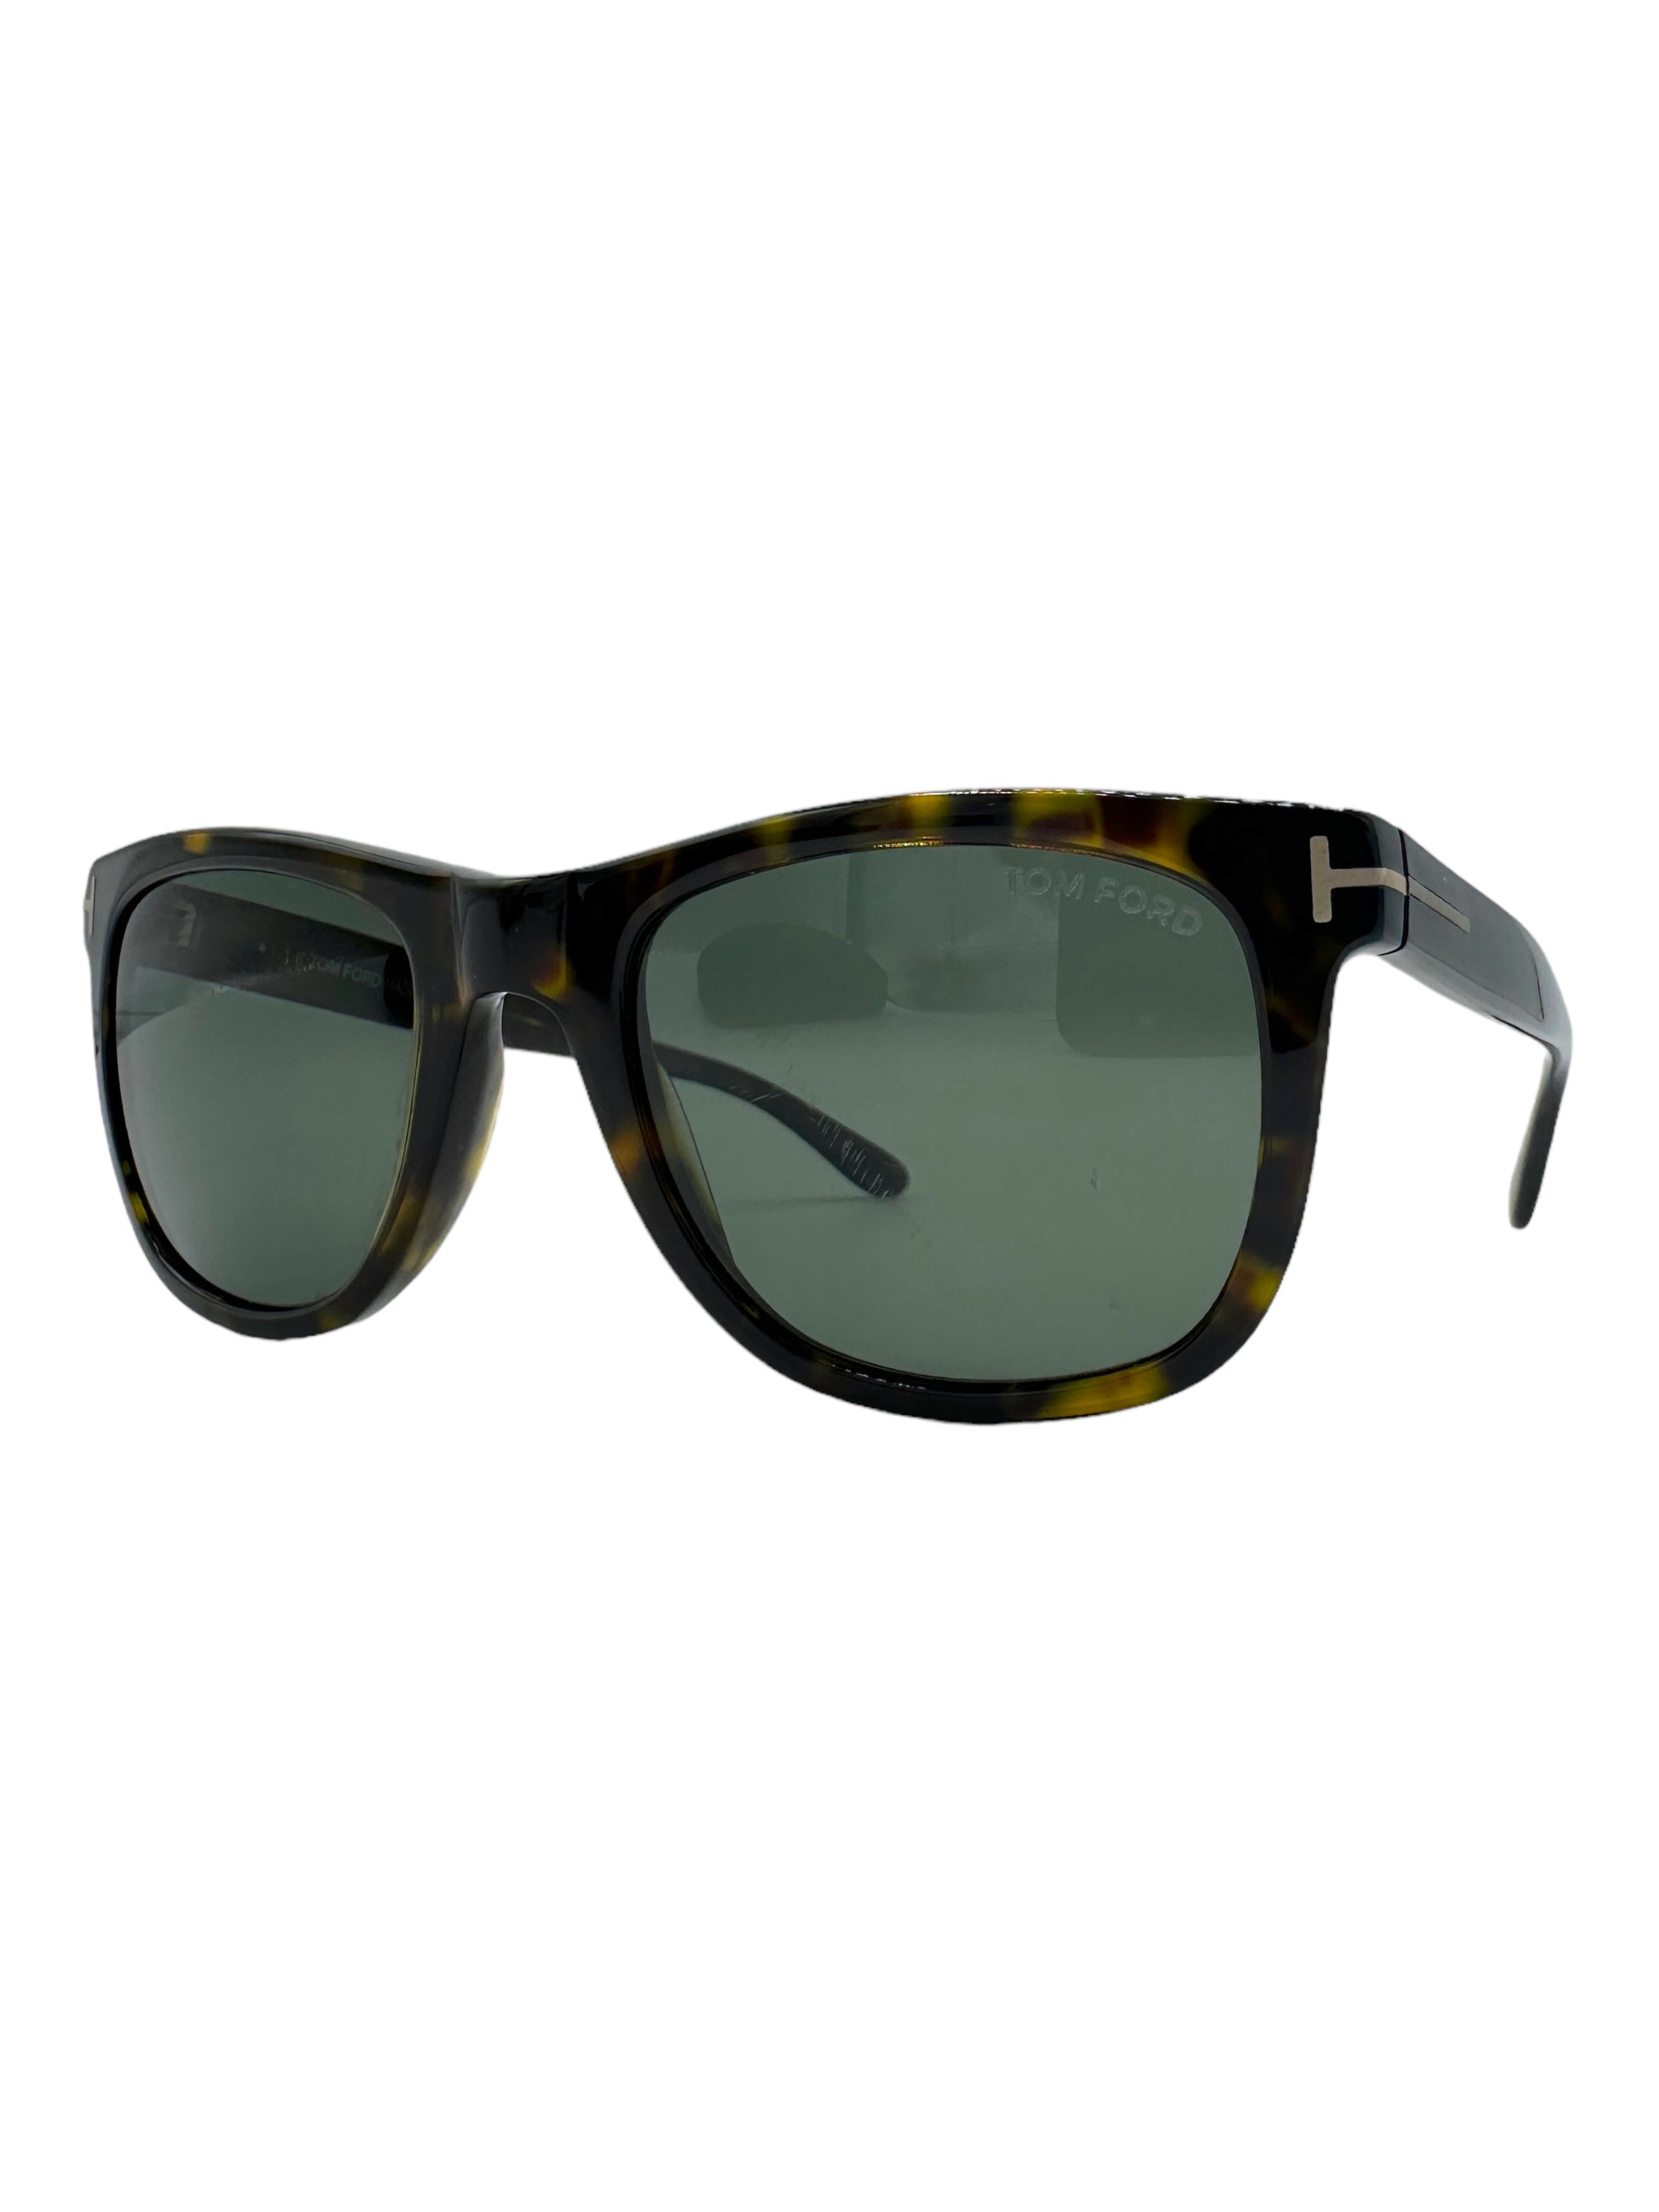 Tom Ford Brown Tortoiseshell Snowdon Sunglasses - Genuine Design Luxury Consignment for Men. New & Pre-Owned Clothing, Shoes, & Accessories. Calgary, Canada